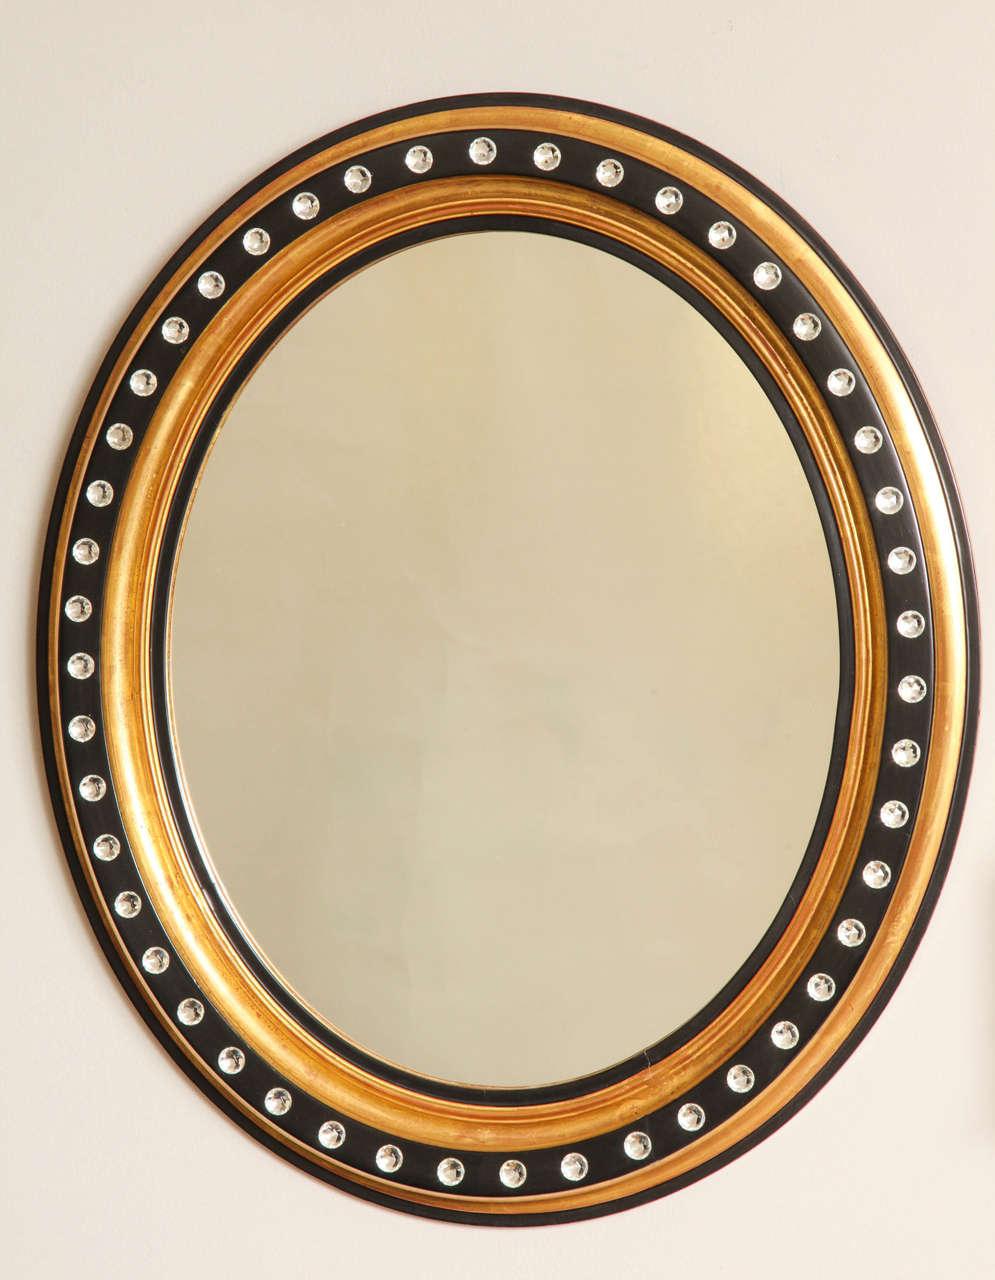 An oval Irish Georgian Style mirror with gilt frame, having black contrasting detail decorated with faceted crystal rosettes. The 1920s frame newly finished and decorated.